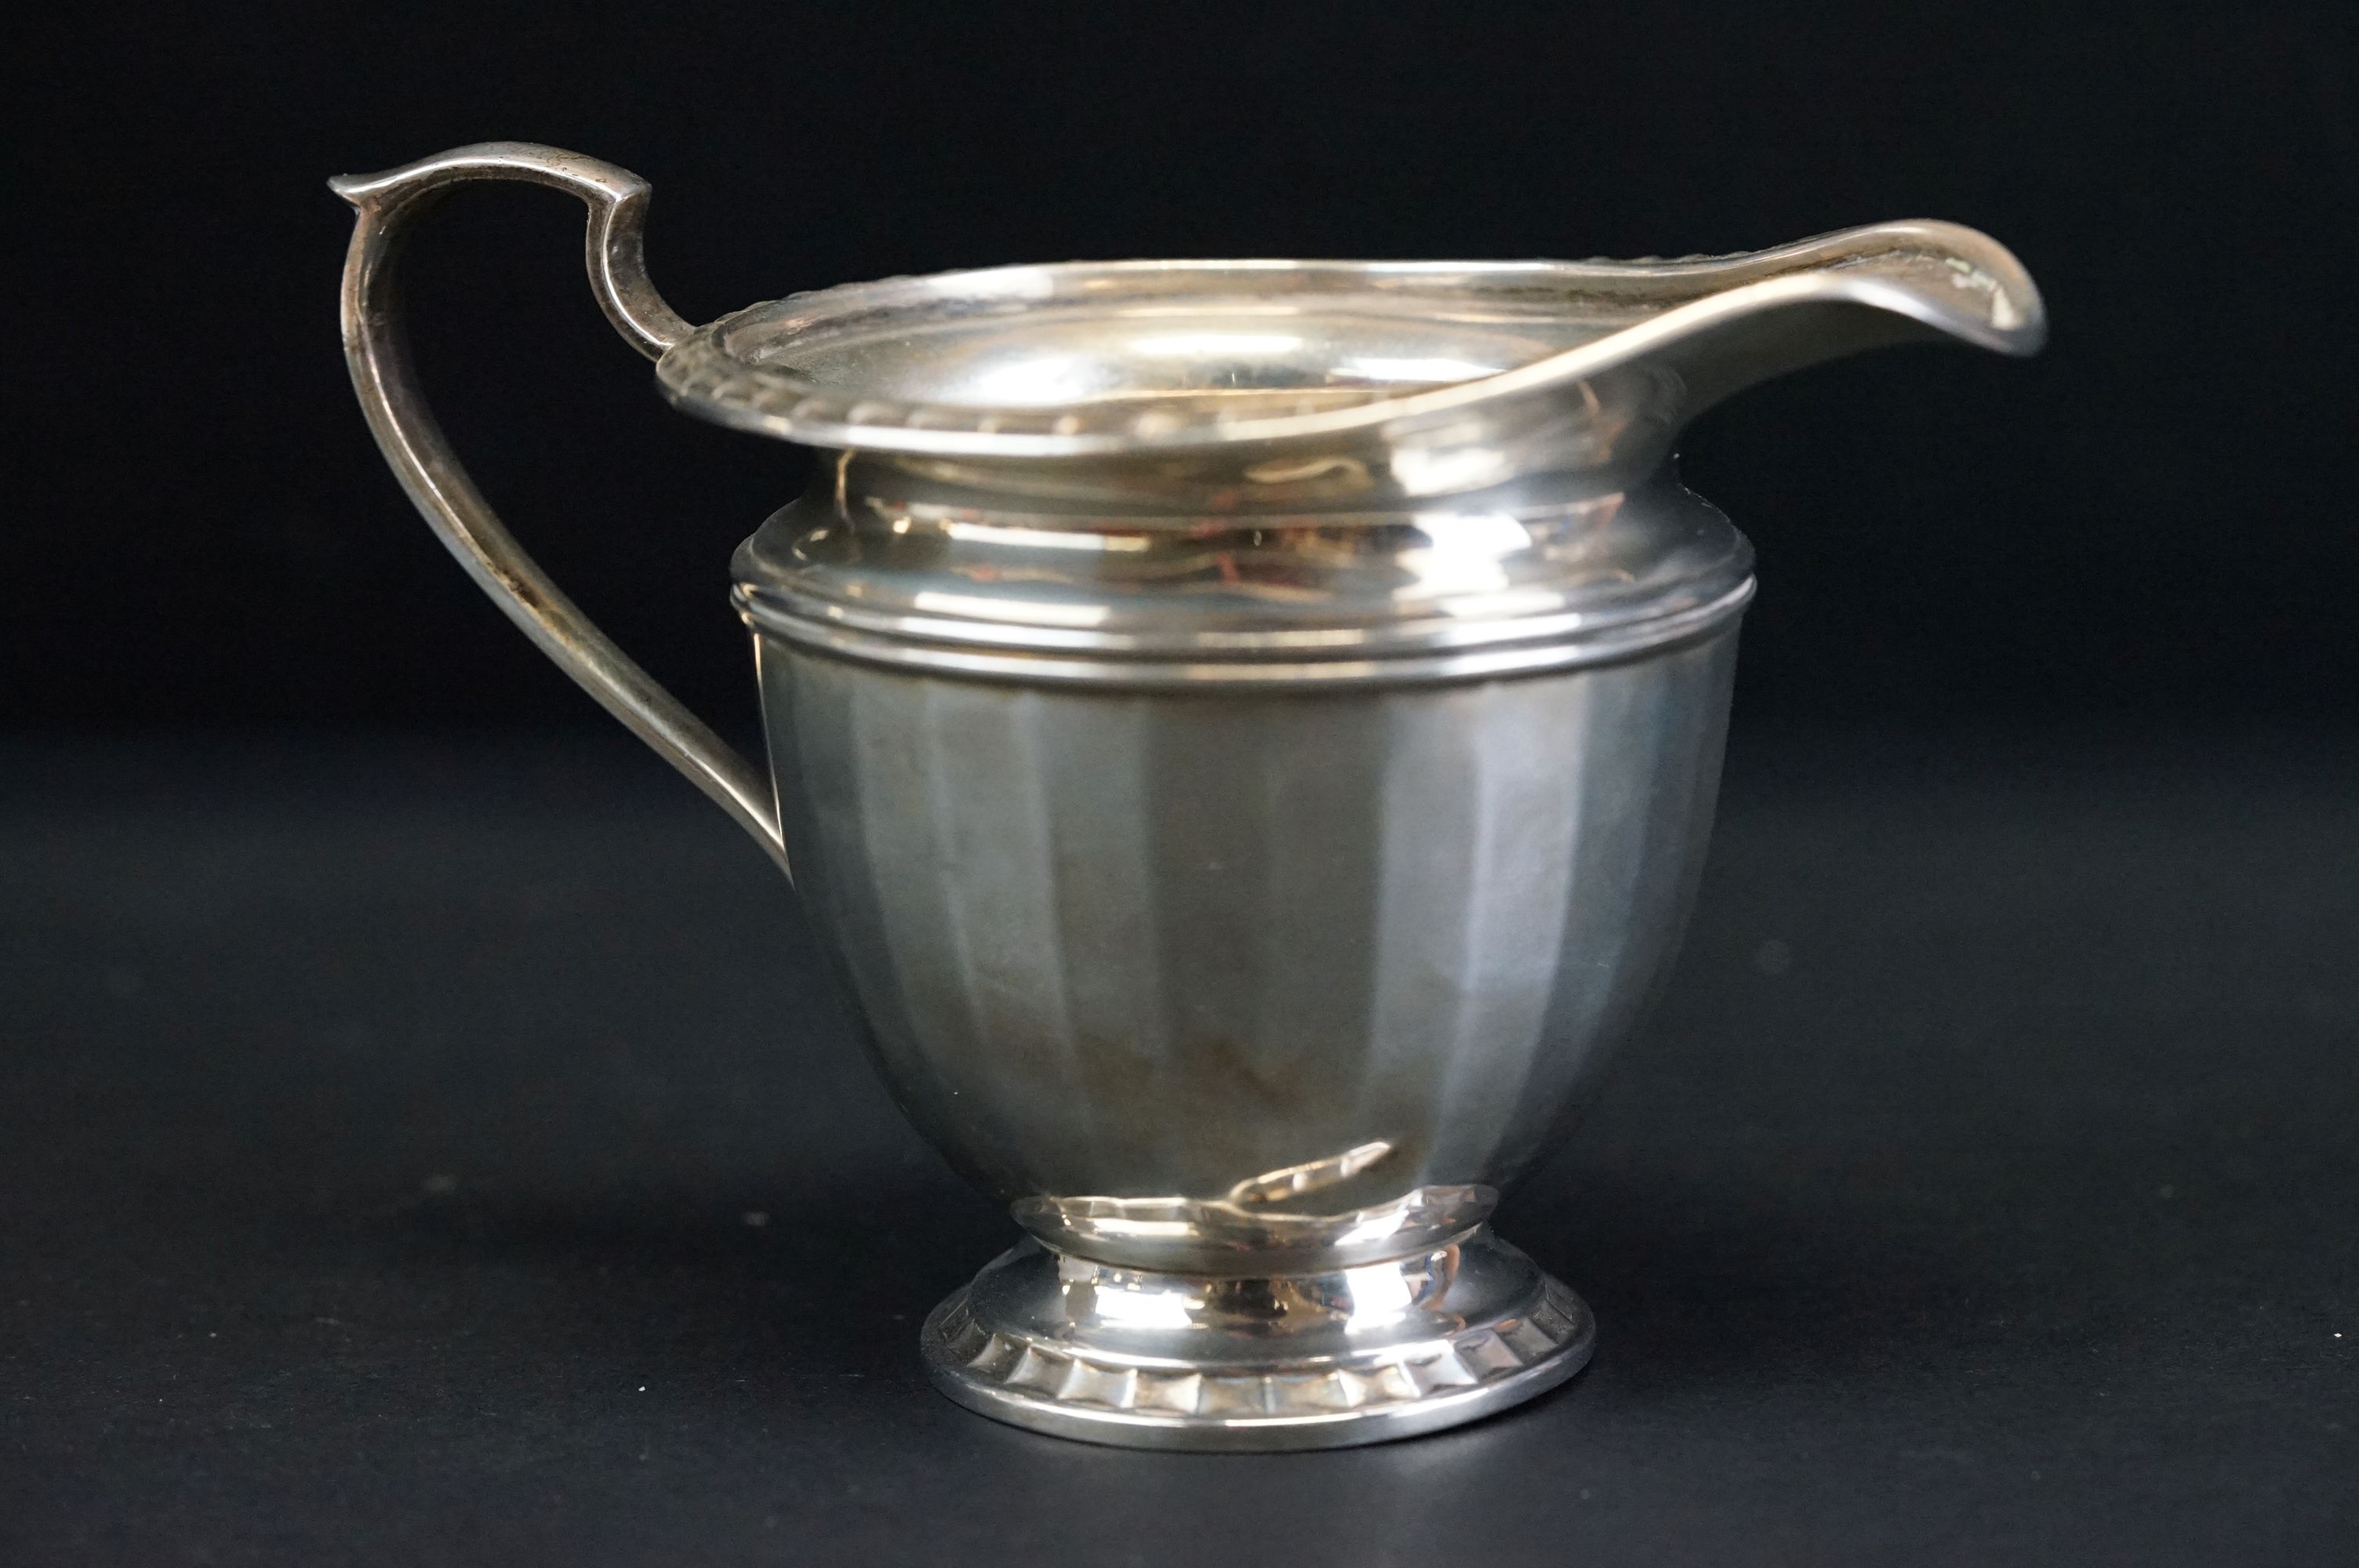 Barker Brothers 1930s silver four piece tea service comprising a teapot, hot water pot, twin-handled - Image 14 of 21